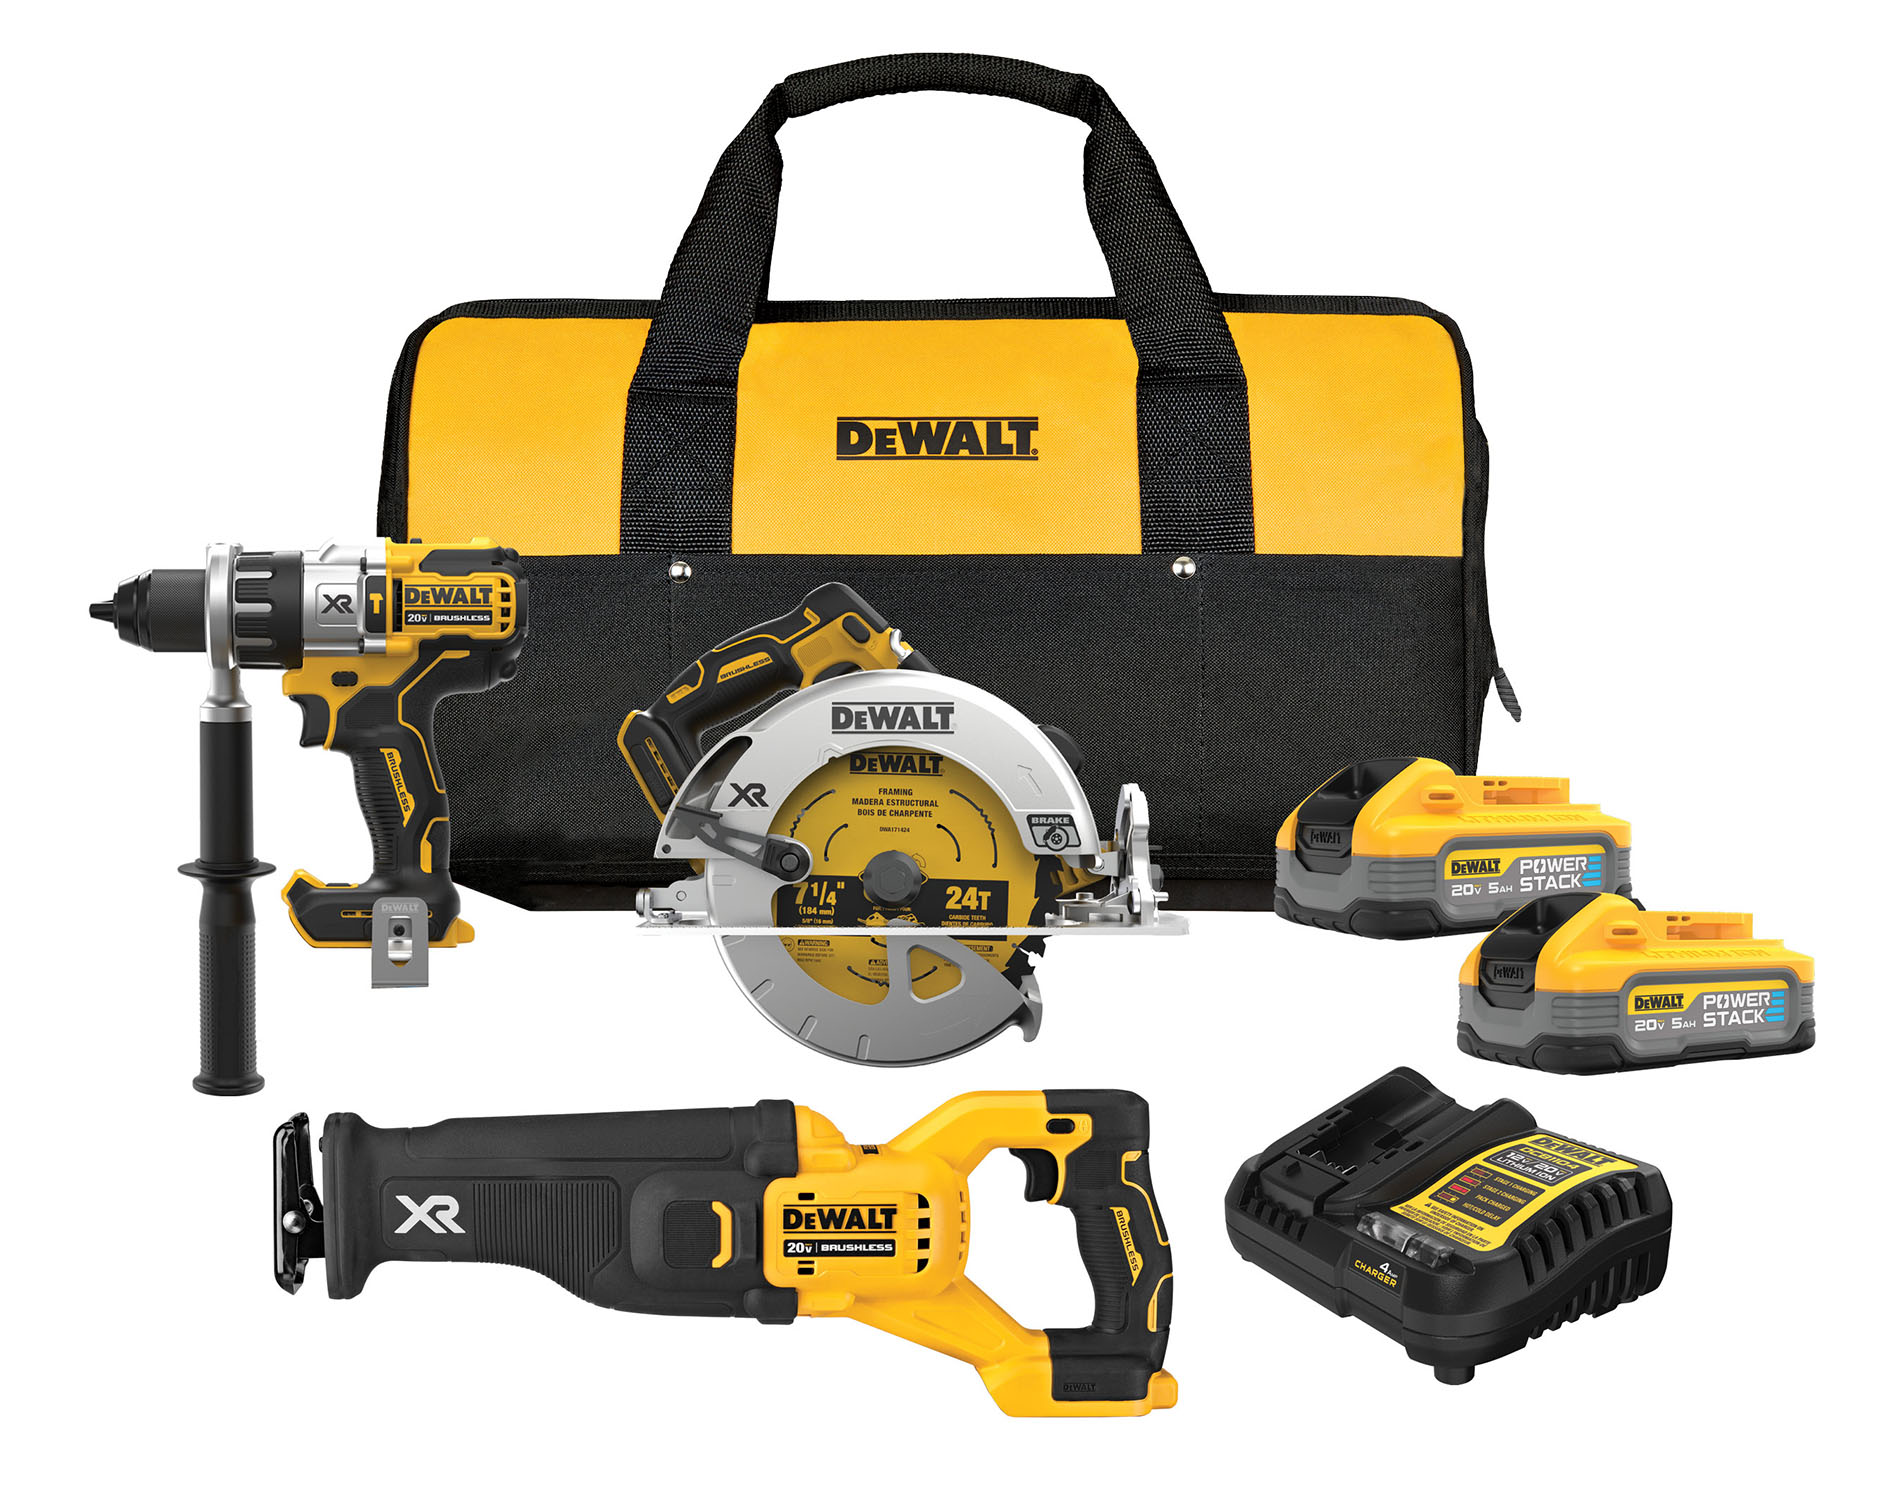 DEWALT XR POWERDETECT 3-Tool 20-volt max Brushless Power Tool Combo Kit with Soft Case (2-Lithium ion (Li-ion) Batteries and Charger Included) -  DCK310H2